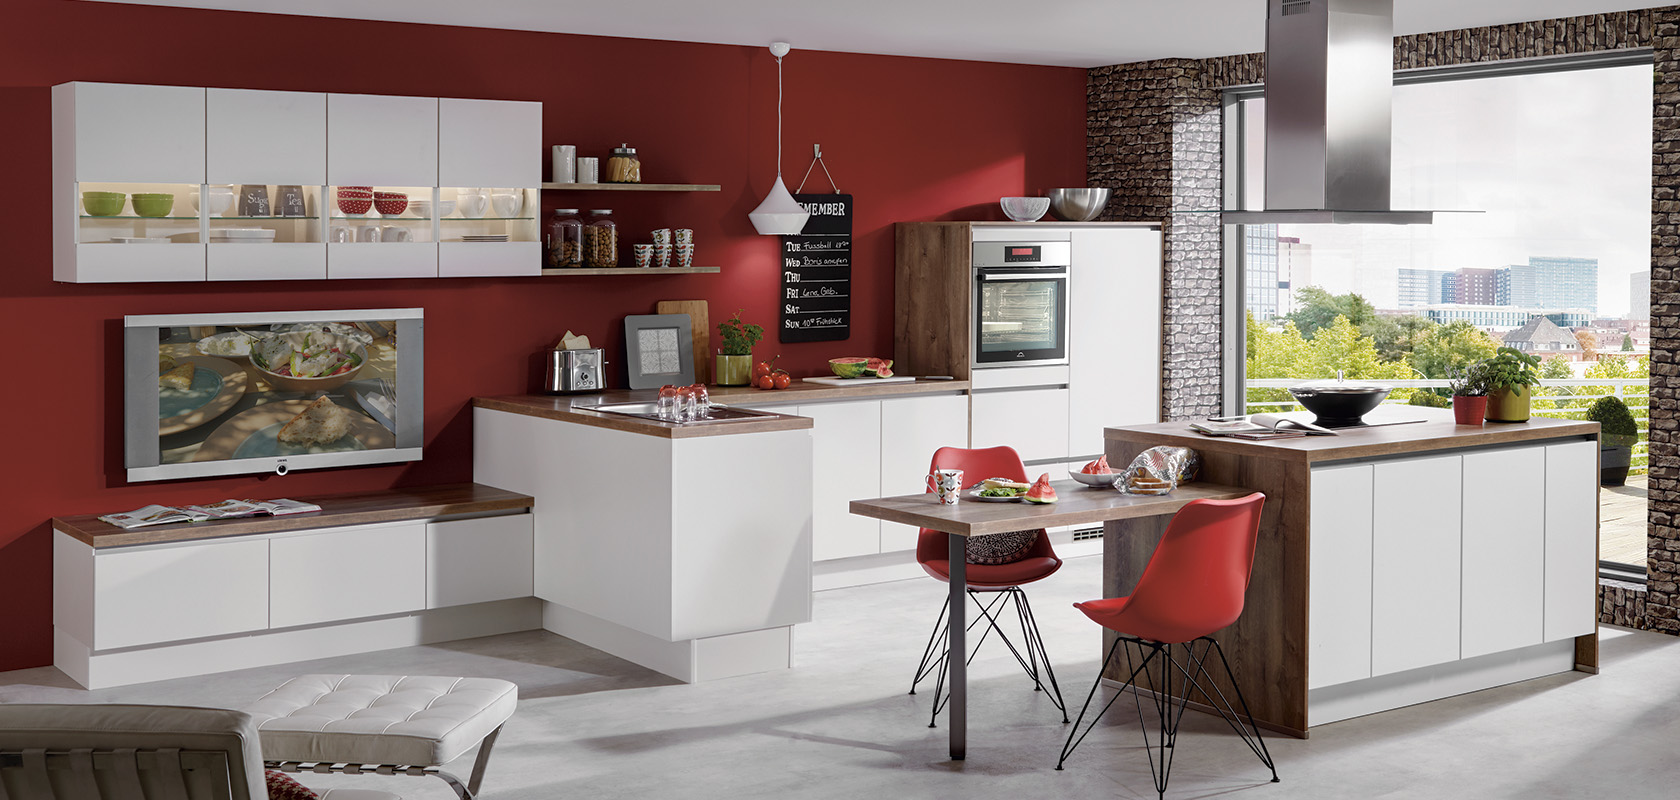 Modern kitchen interior with white modular cabinetry, red accent walls, brick features, sleek appliances, and a cozy dining area with a picturesque window view.